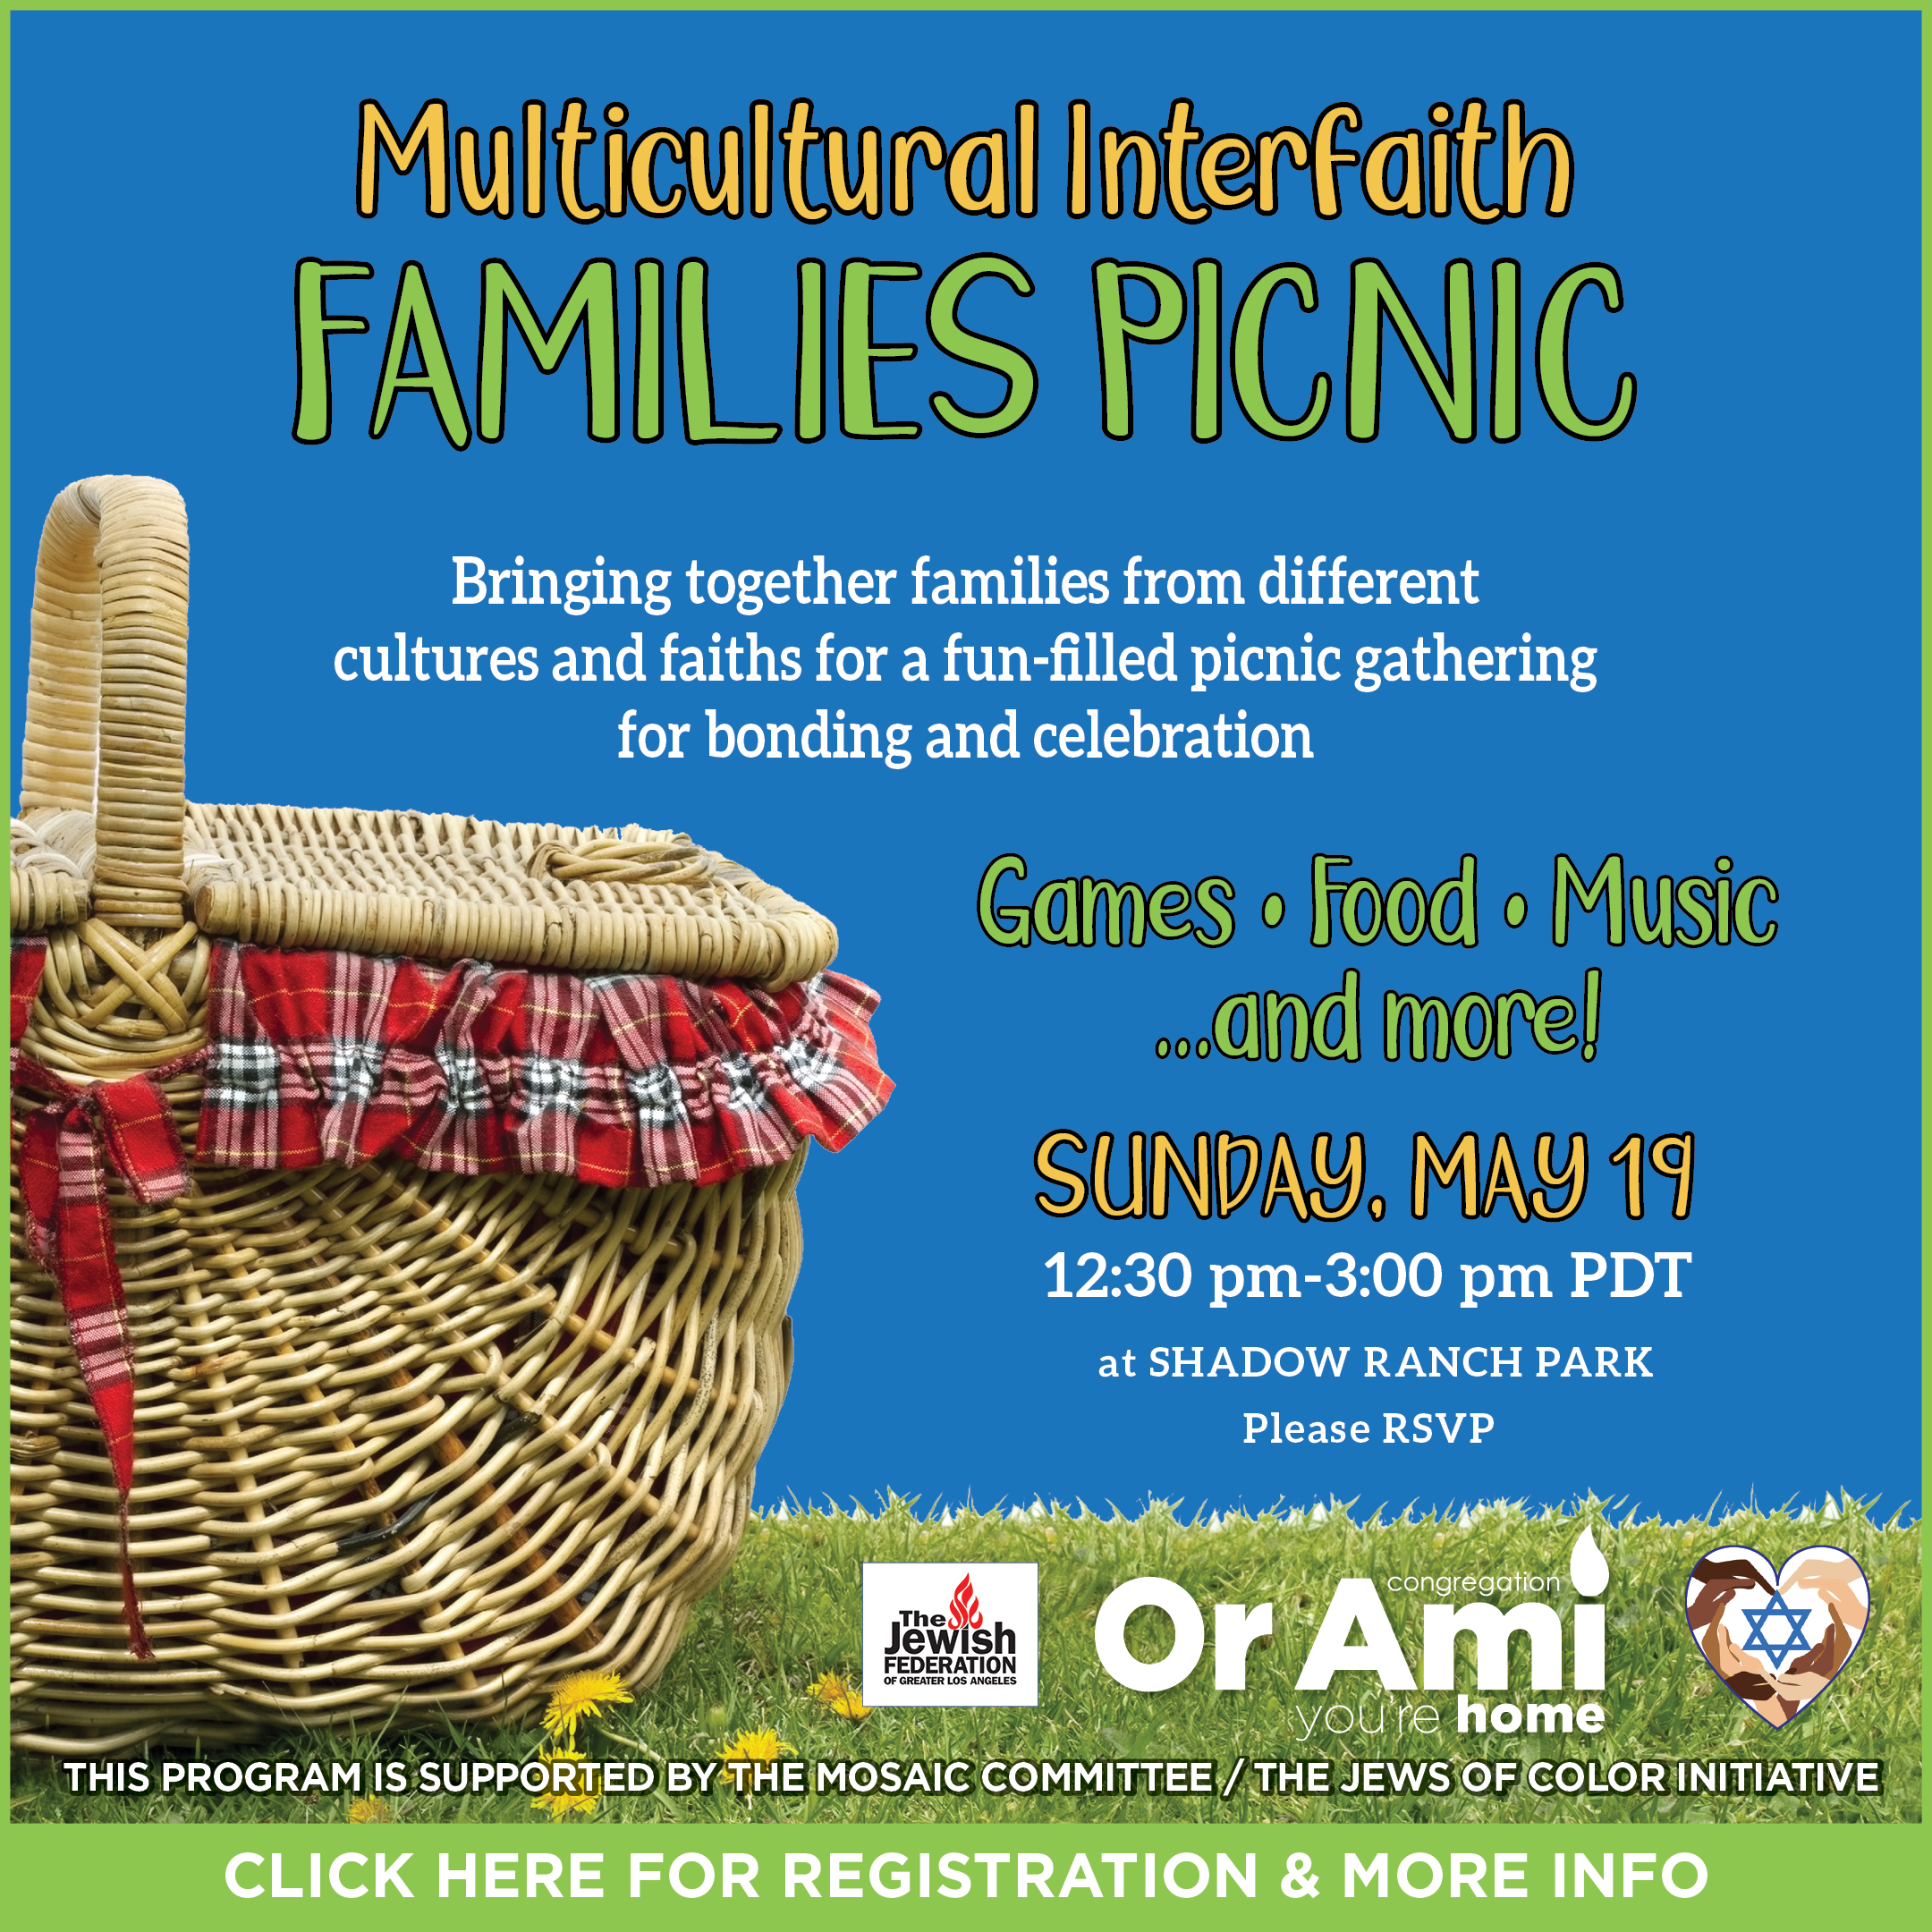 *2 Or Ami Multicultural Interfaith Families Picnic CLICK